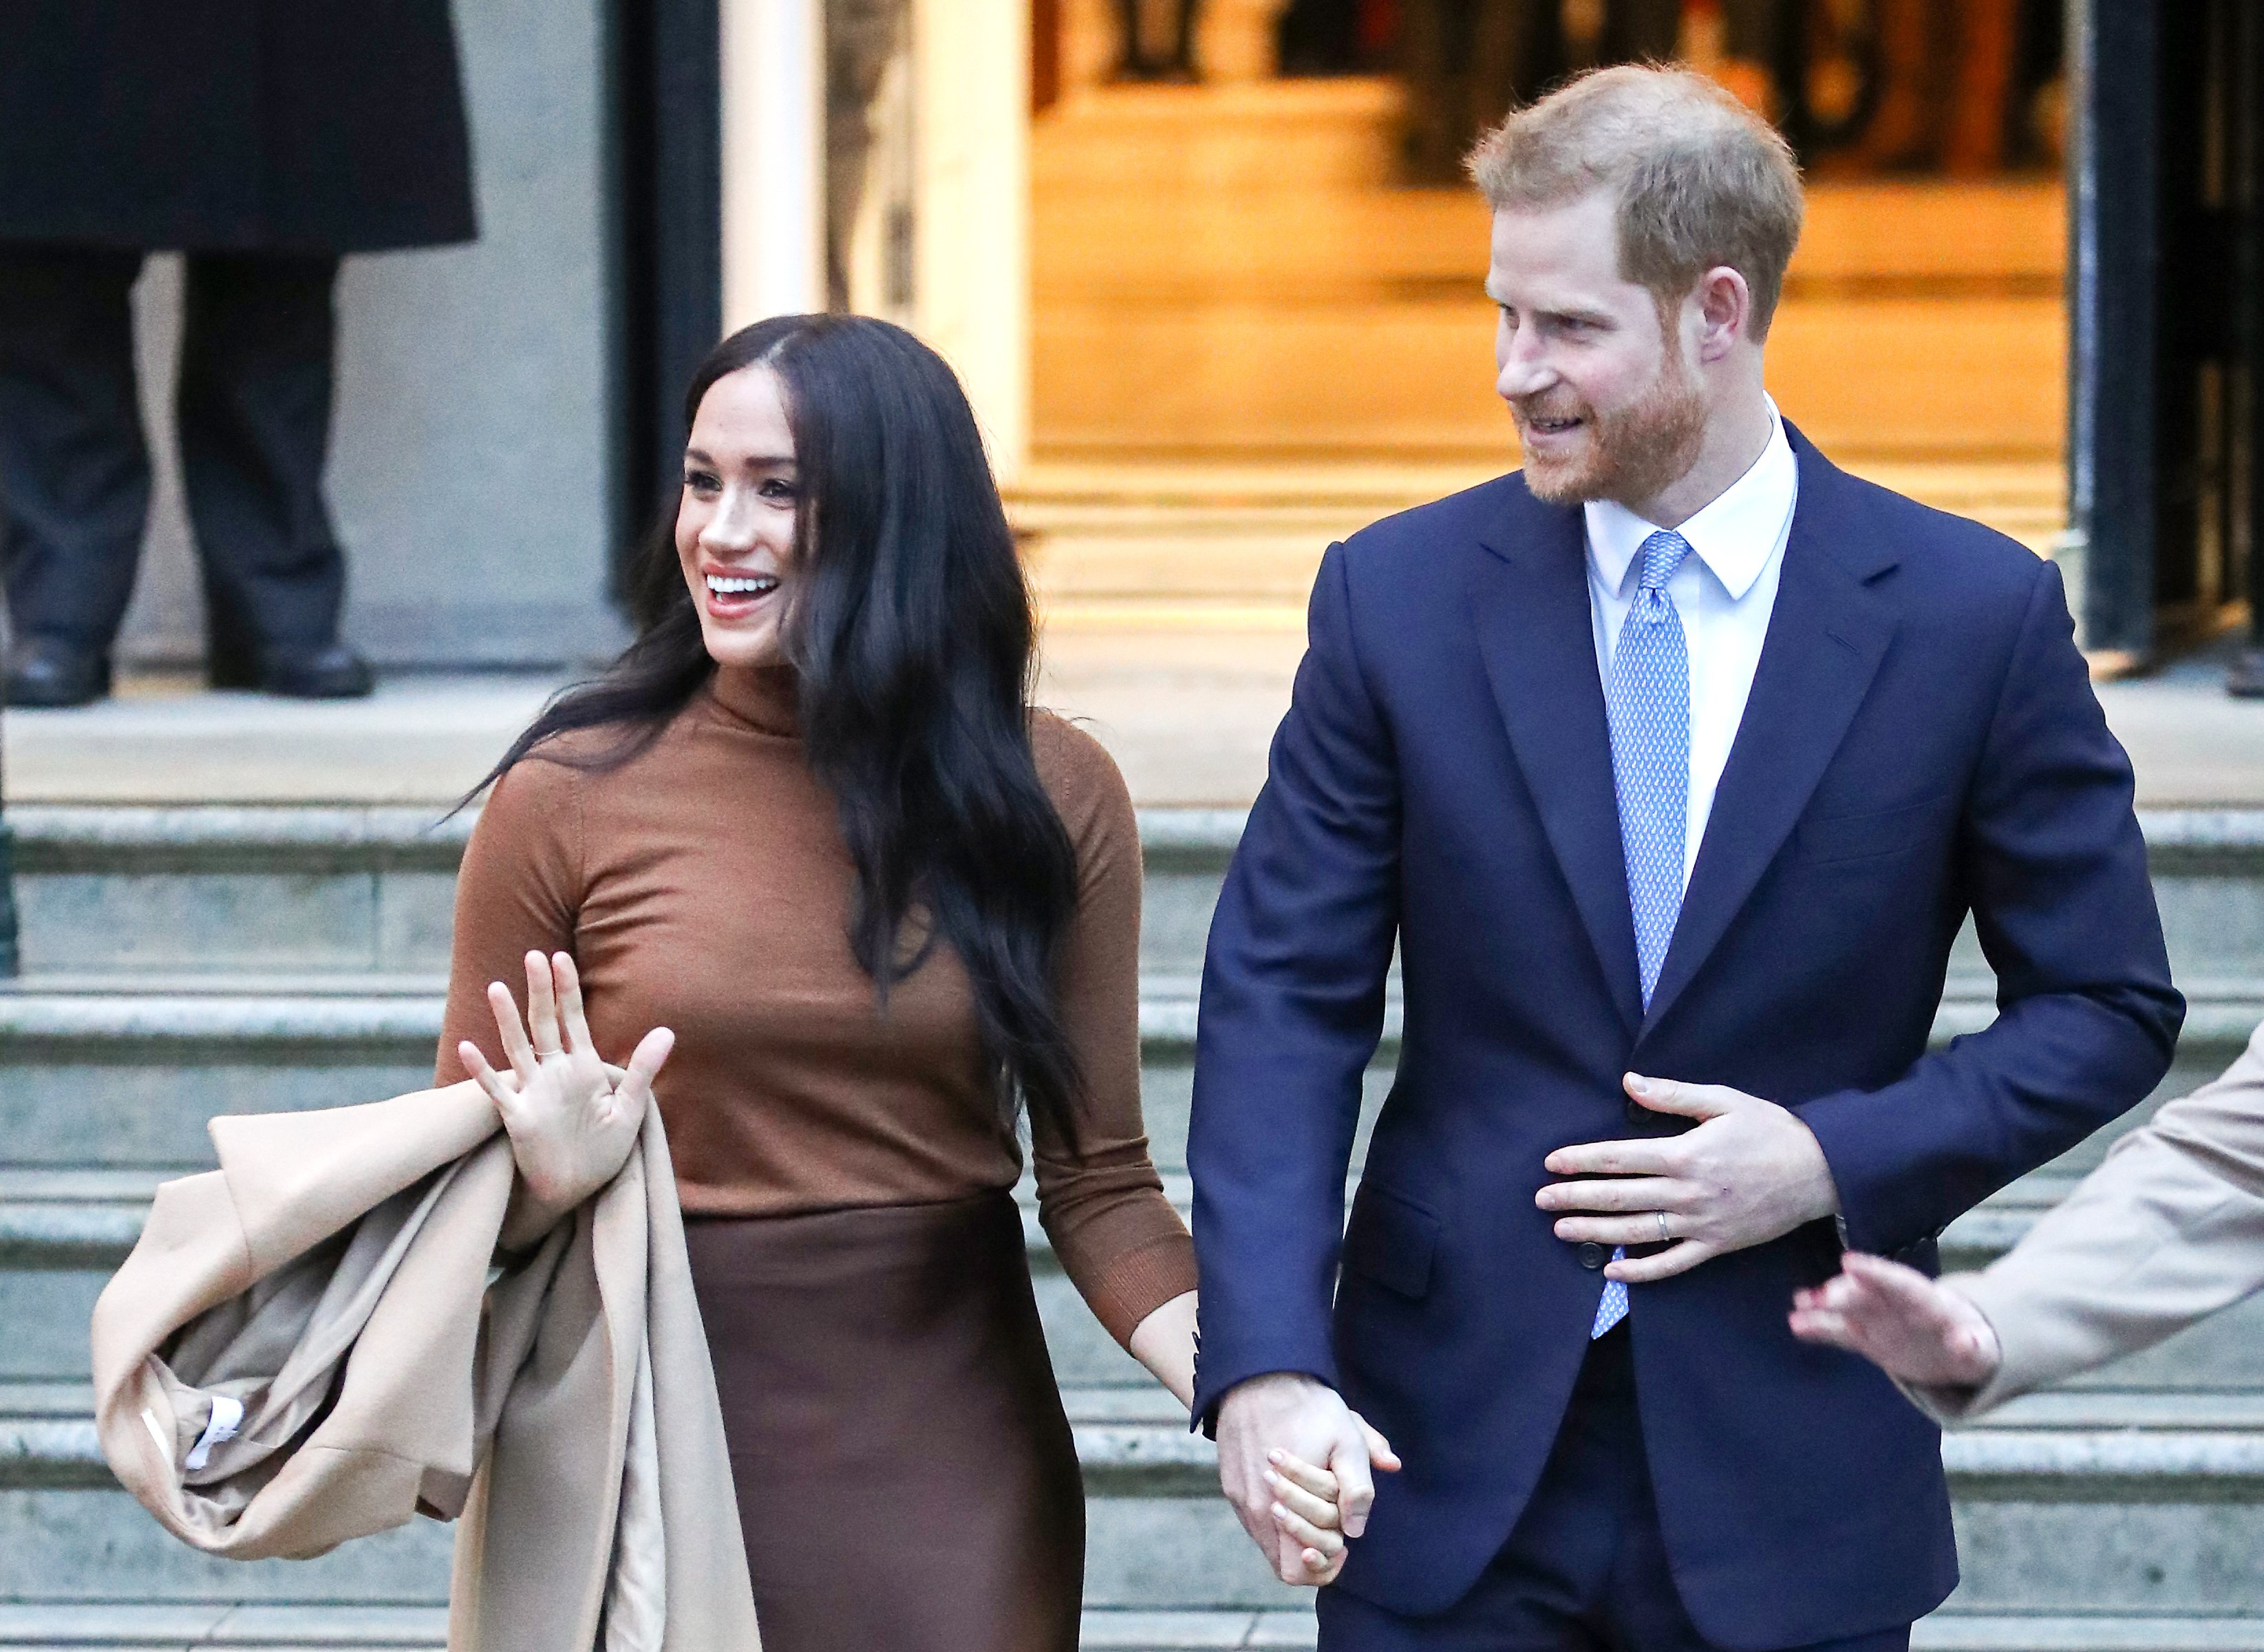 Prince Harry and Meghan Markle depart Canada House on January 07, 2020, in London, England. | Source: Getty Images.